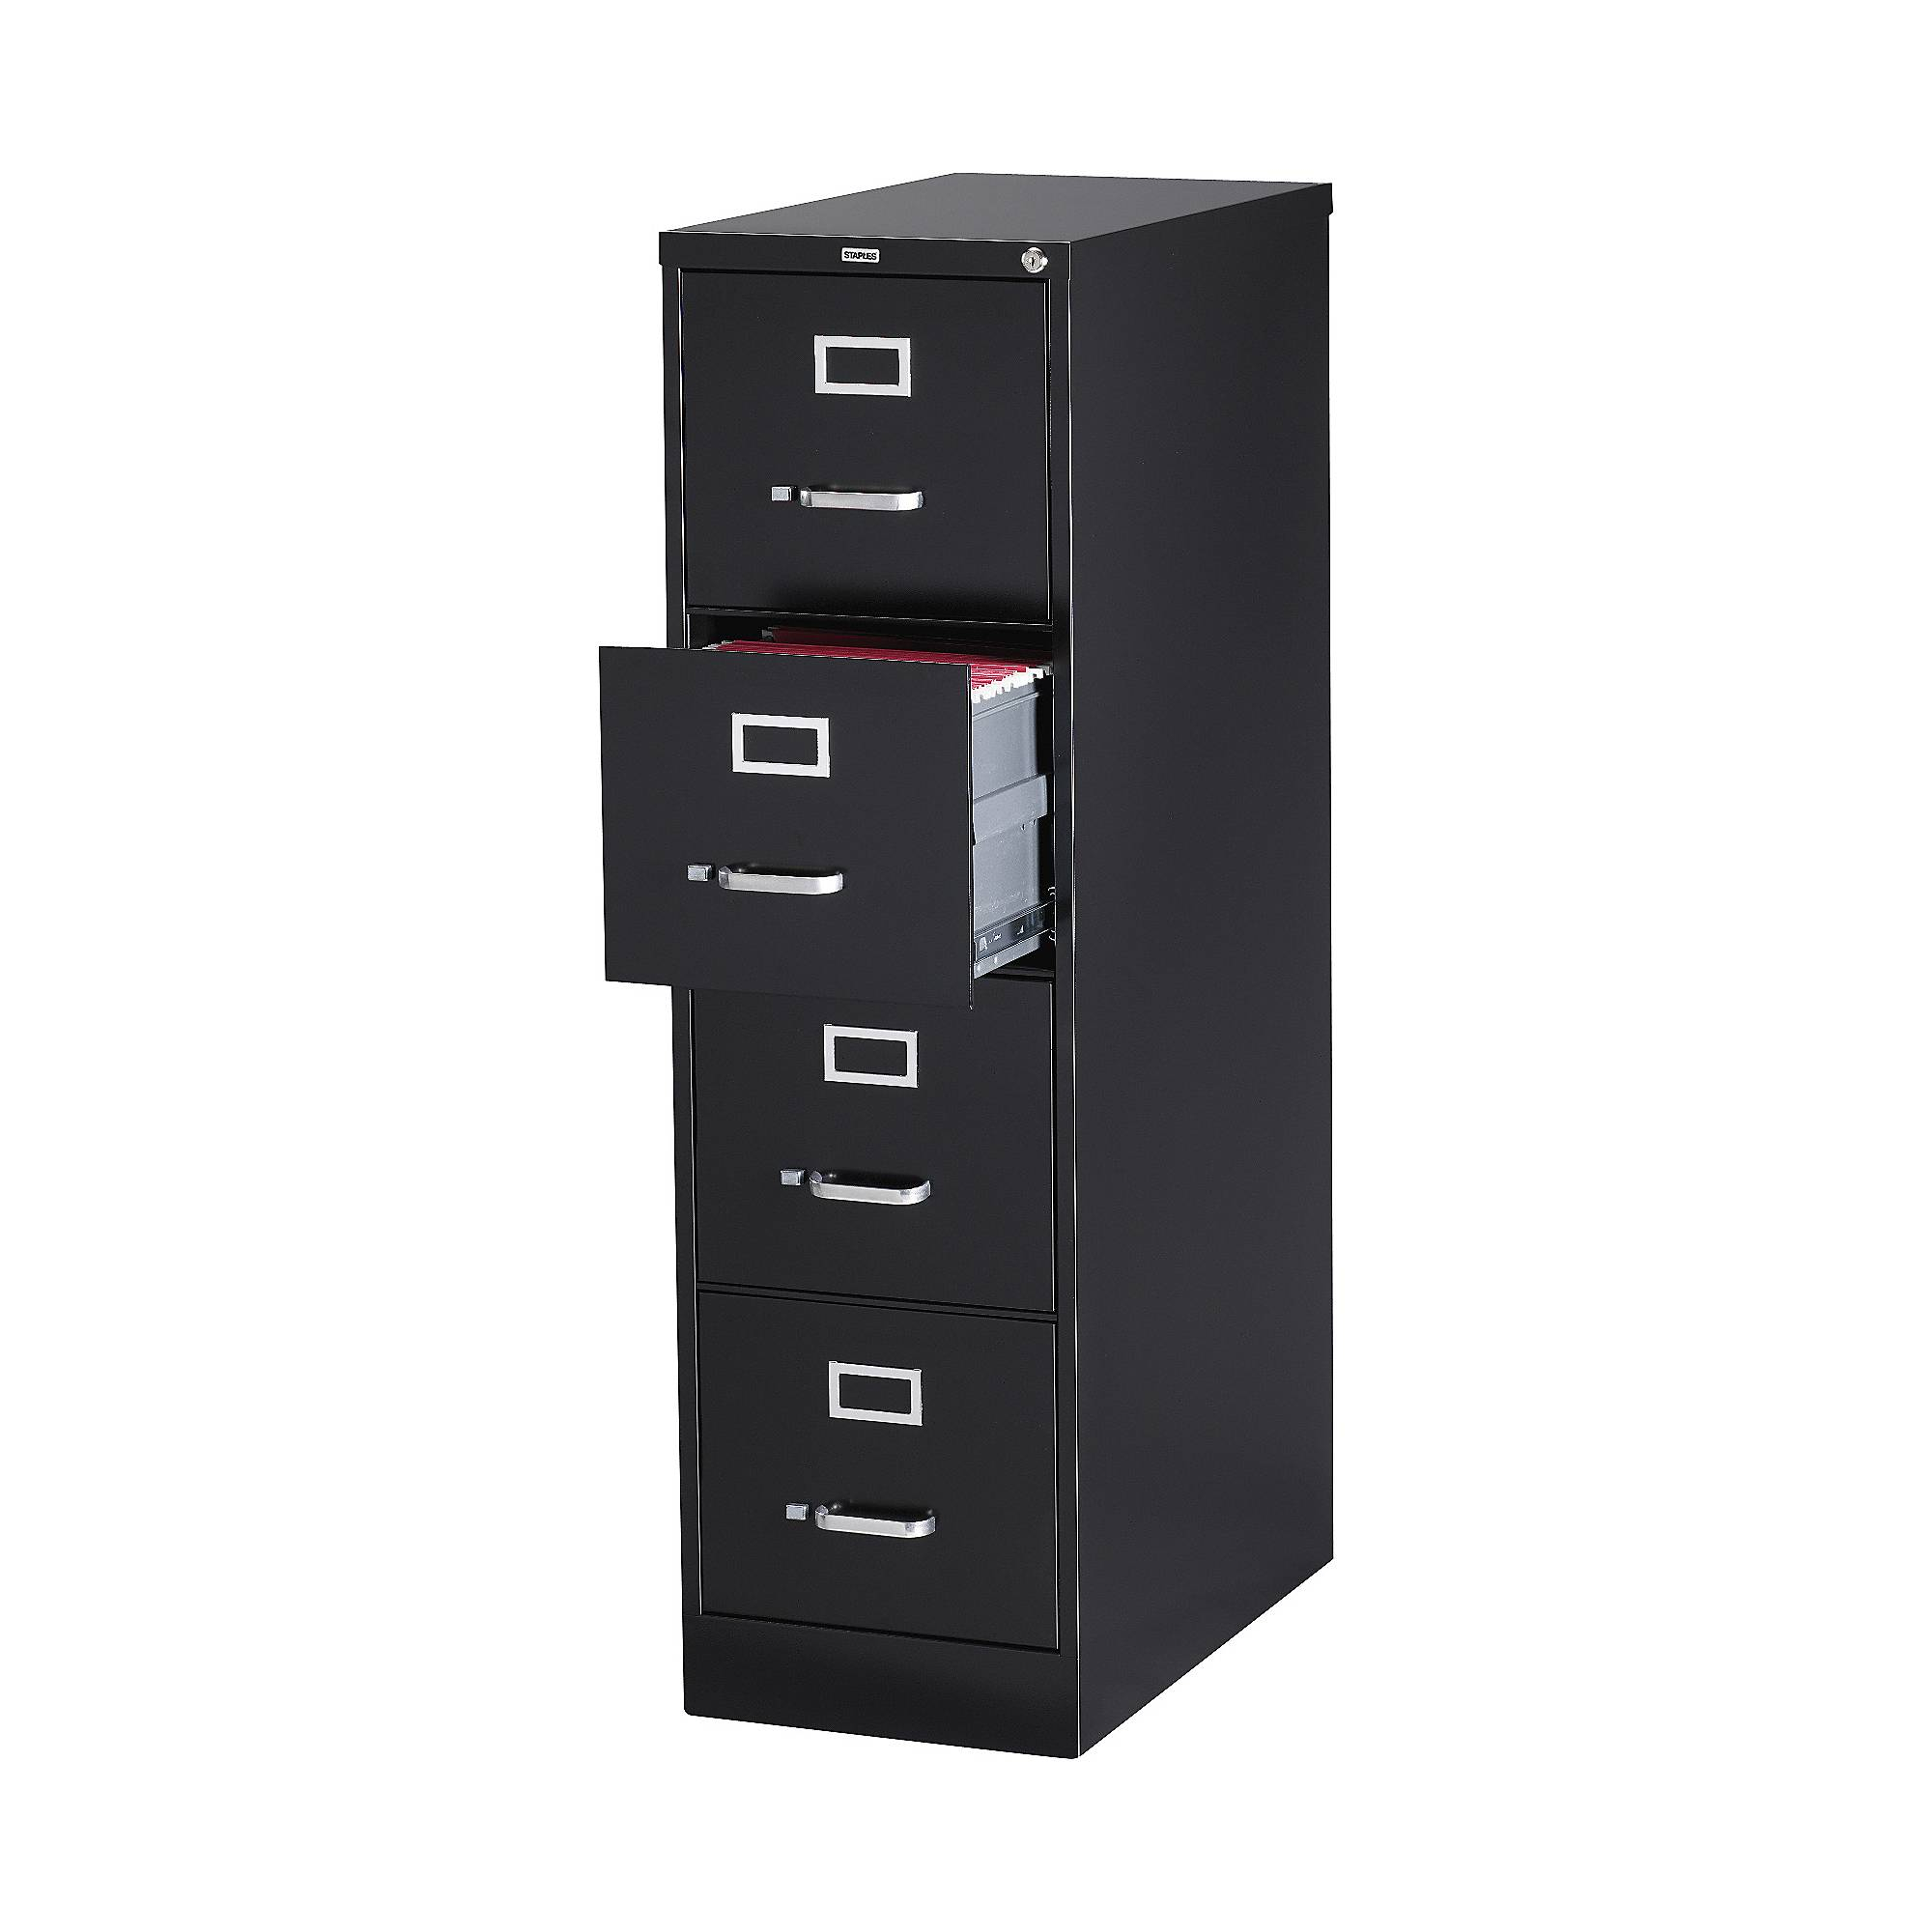 Staples 4 Drawer Vertical File Cabinet Walmart throughout proportions 2000 X 2000